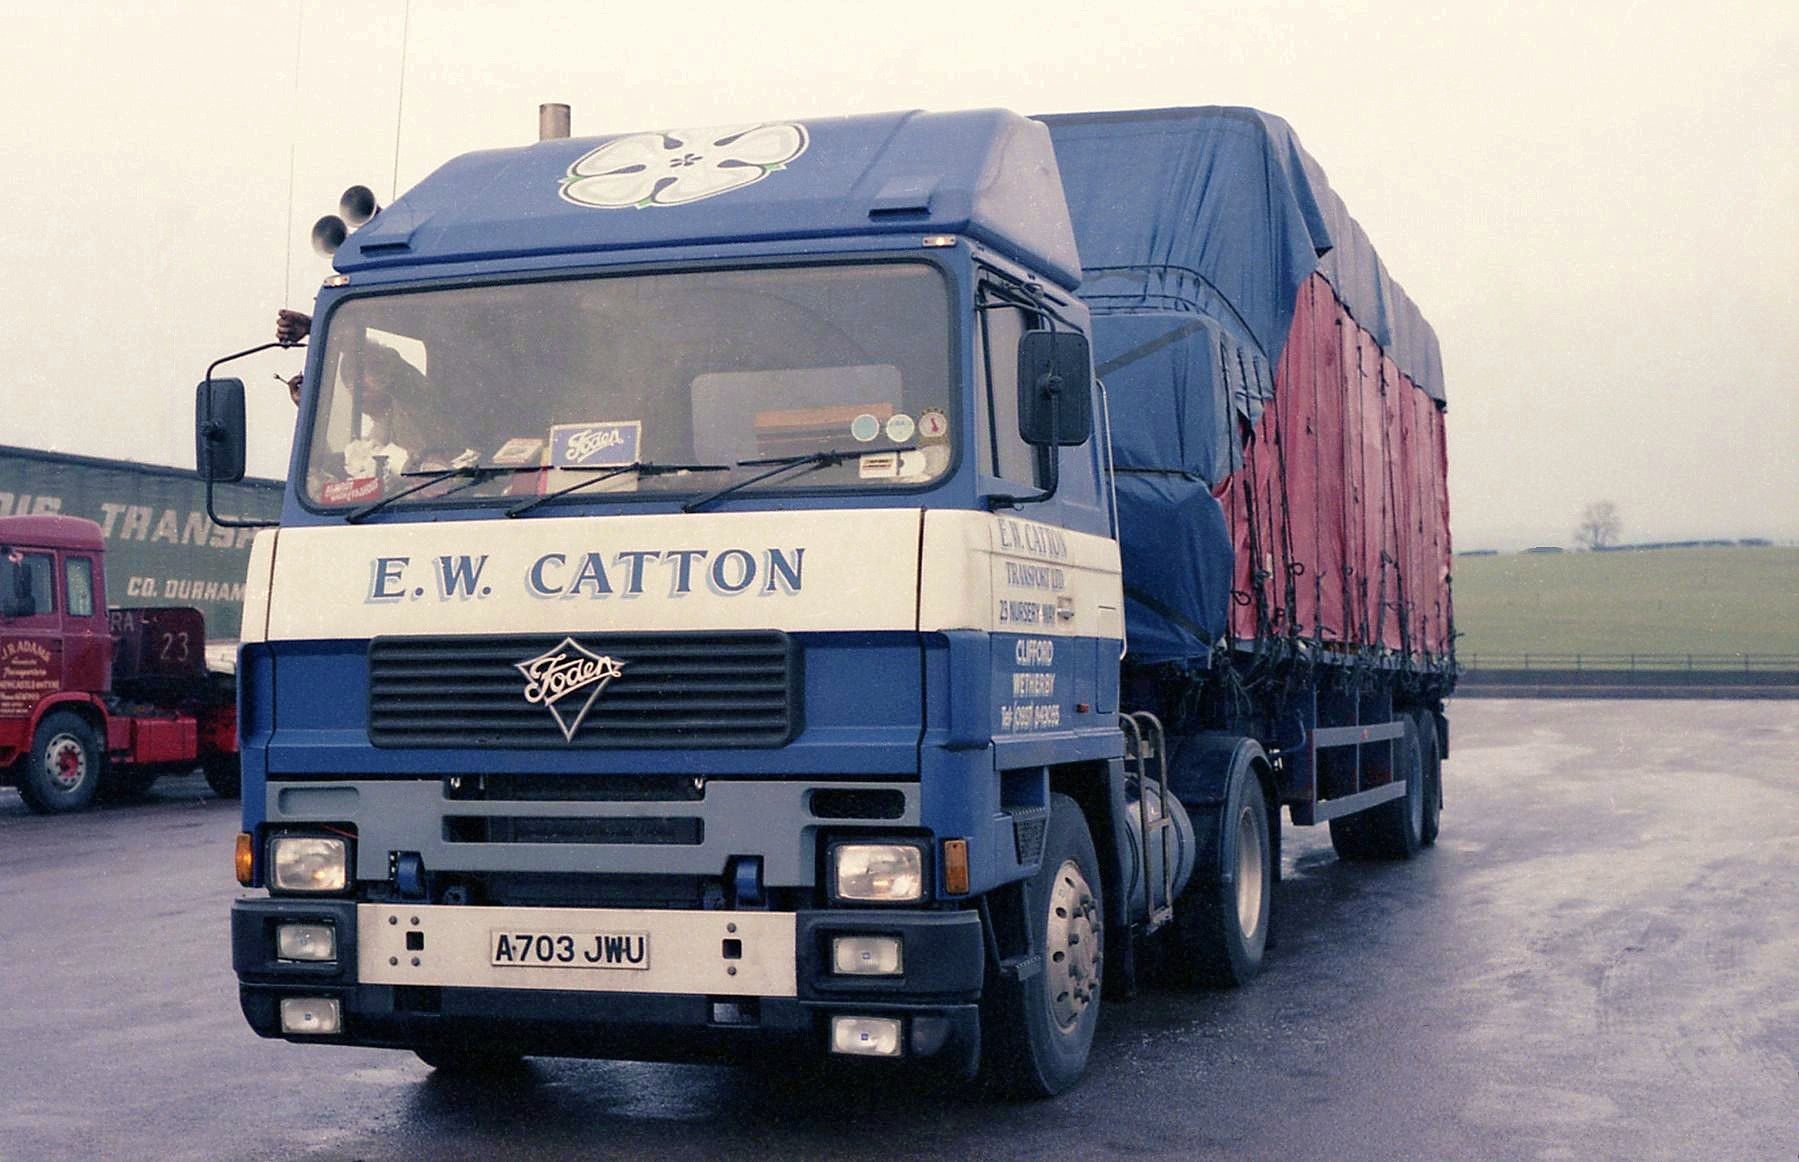 The Foden S10 Mk3 4x2 tractor